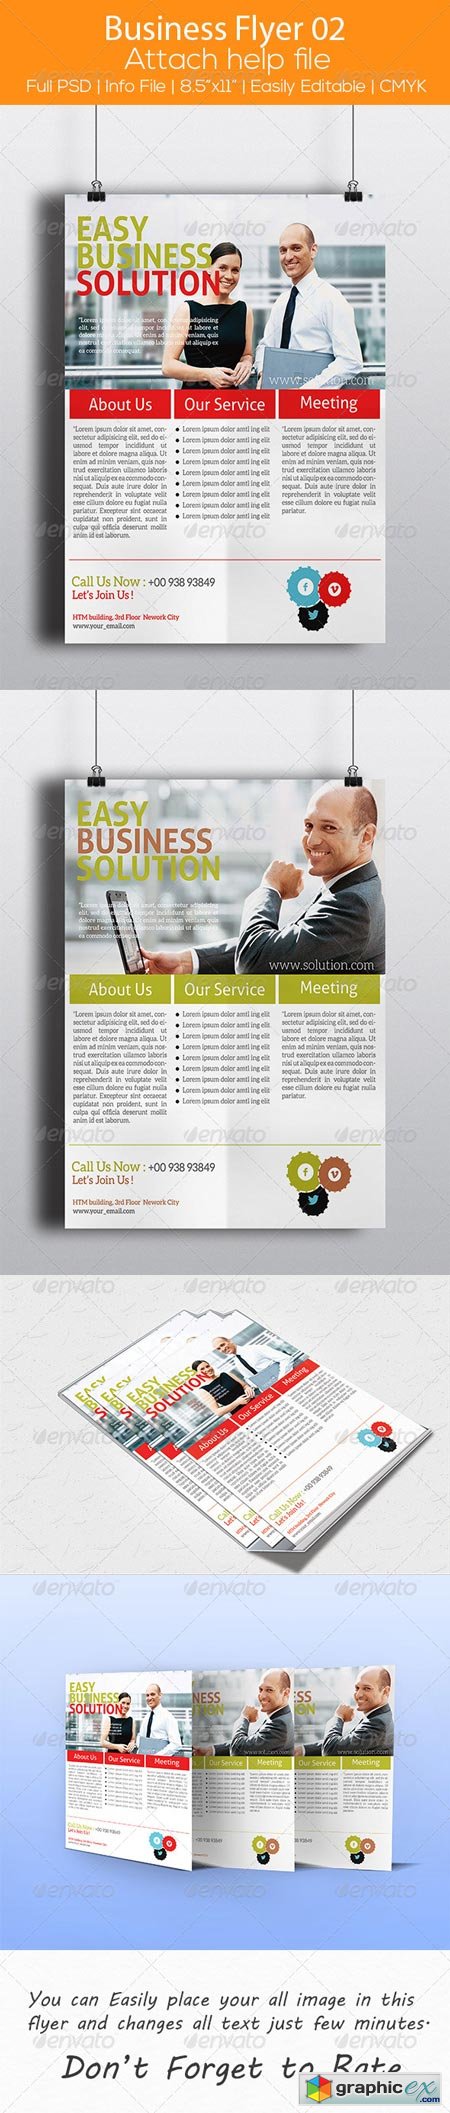 Business Flyer 02 6950809